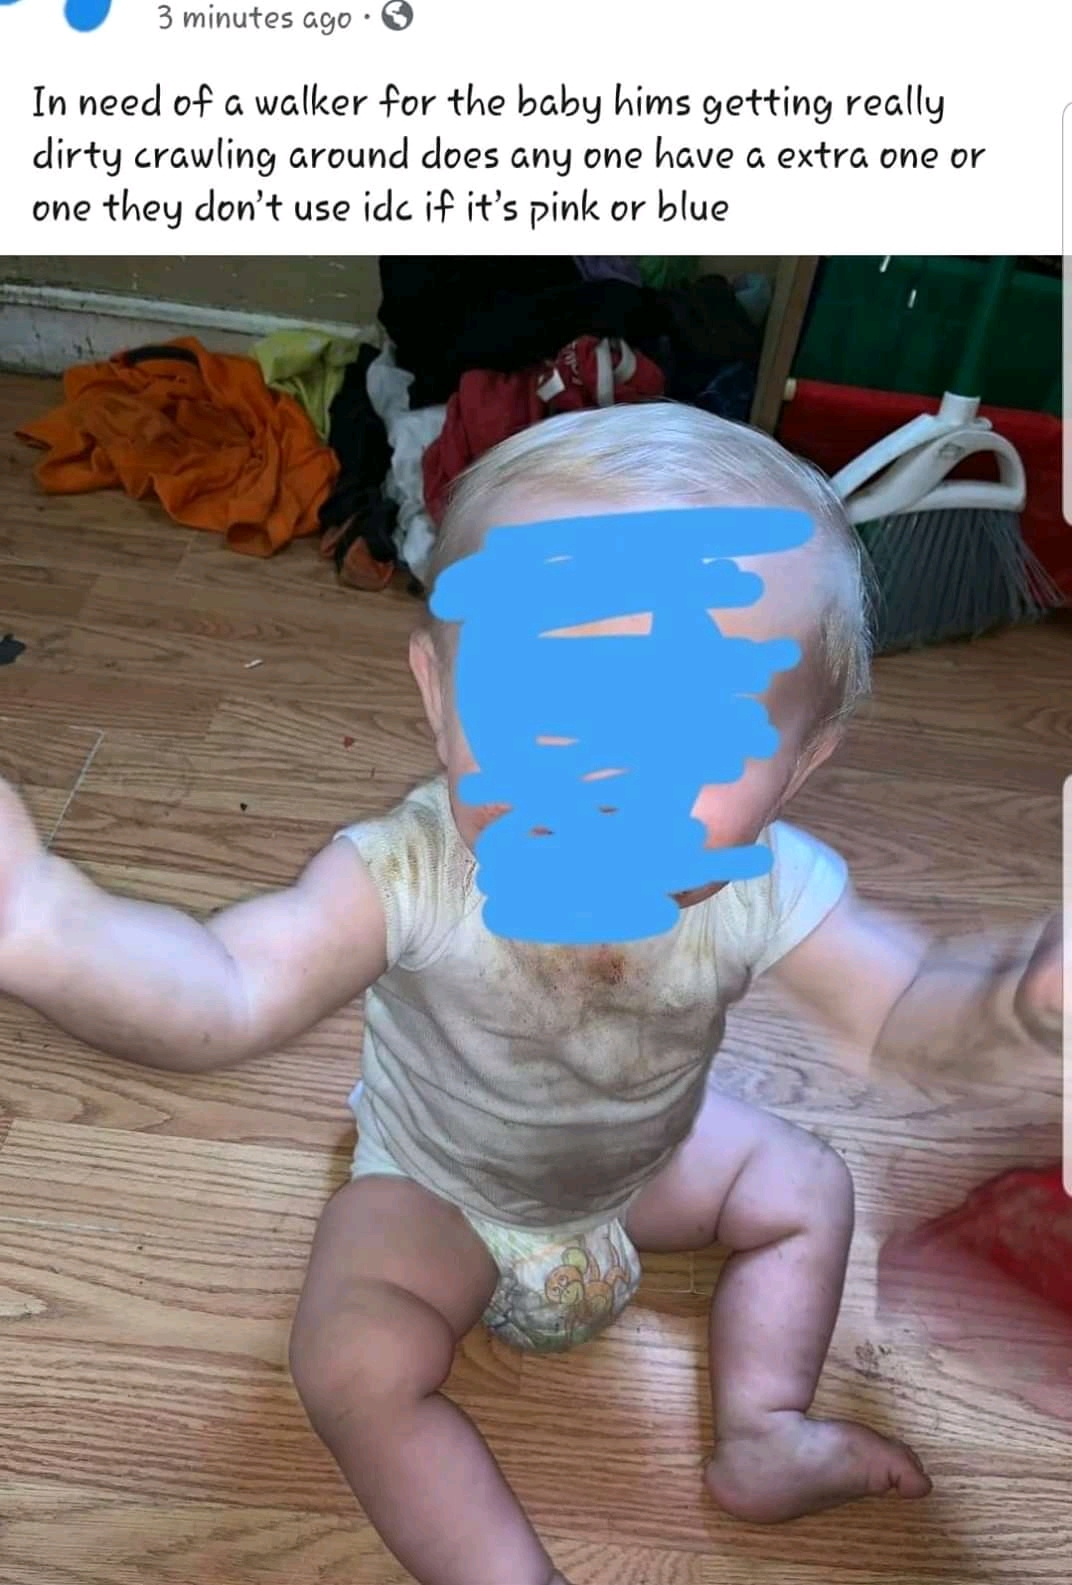 toddler - 3 minutes 499. In need of a walker for the baby hims getting really dirty crawling around does any one have a extra one or one they don't use ide if it's pink or blue